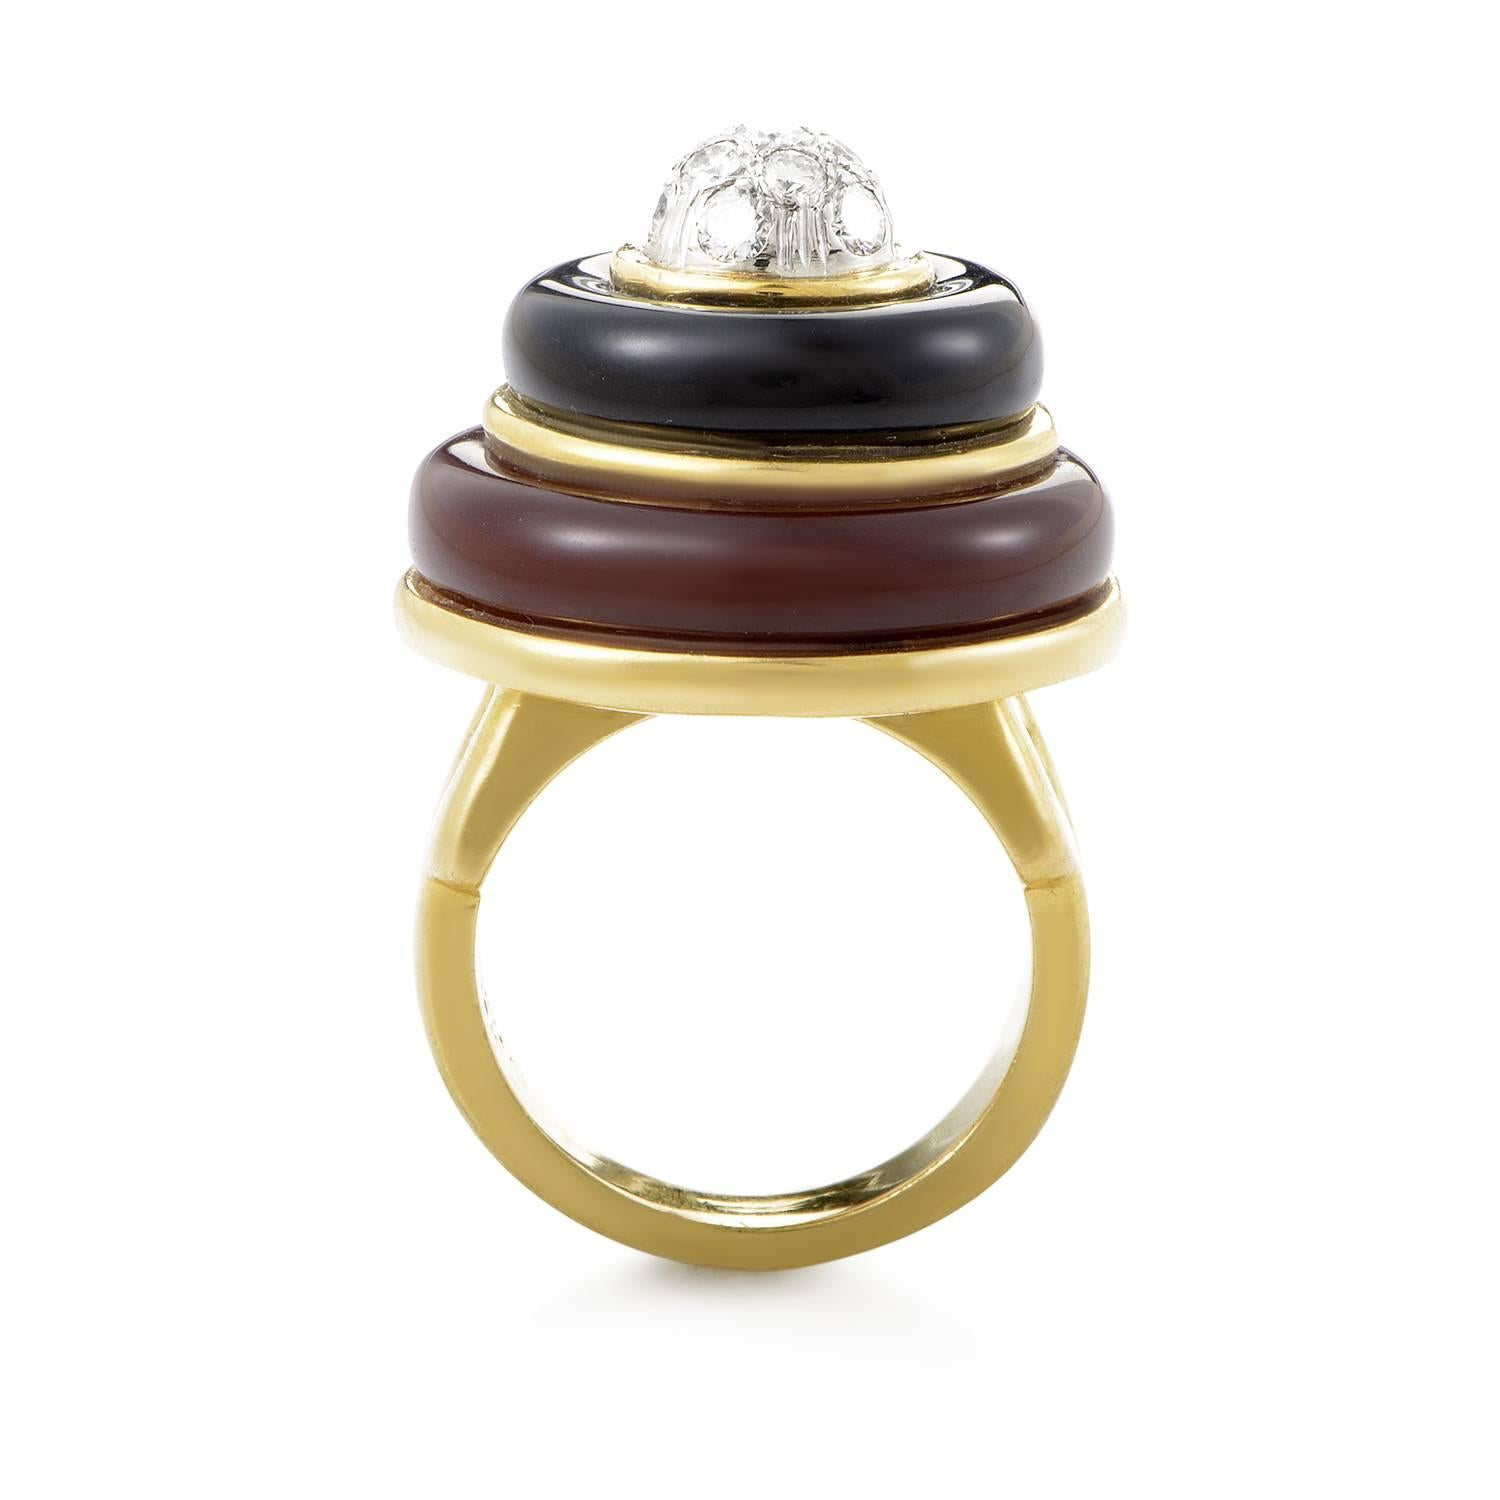 Designs from Tiffany & Co. are always instant classics. This ring from the renowned brand is made of 18K yellow gold and is accented with black and red onyx. Lastly, a bed of white diamonds sits atop the black onyx for an additional dash of